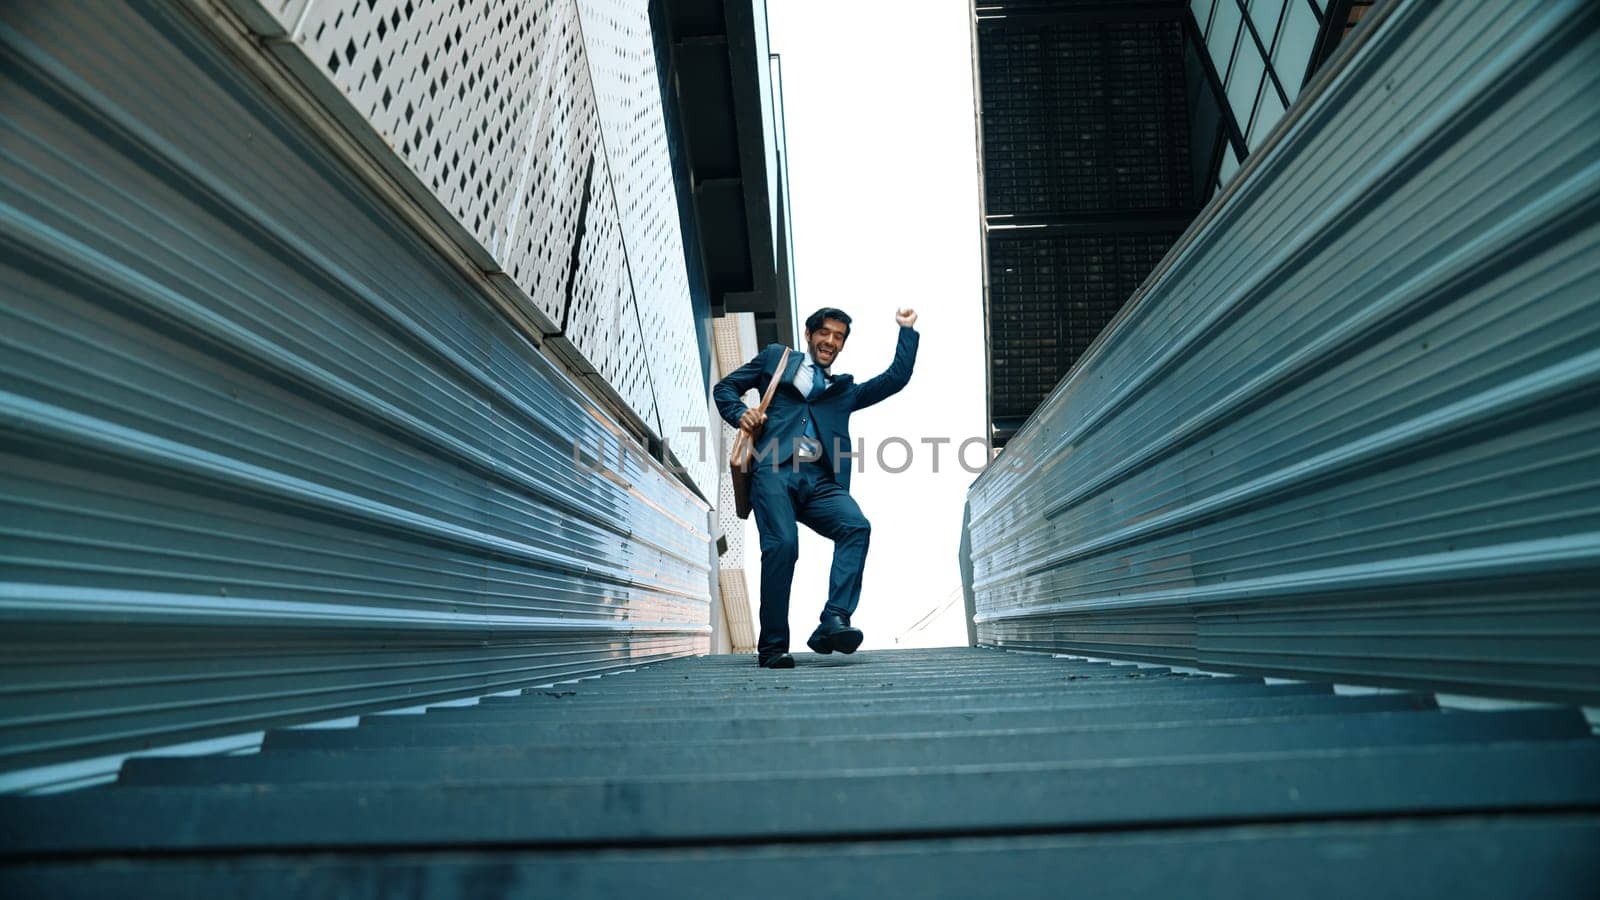 Low angle view of young smiling business man dance between building at center point. Skilled executive manager wearing suit and suitcase and moving to music. Happy investor moving to music. Exultant.